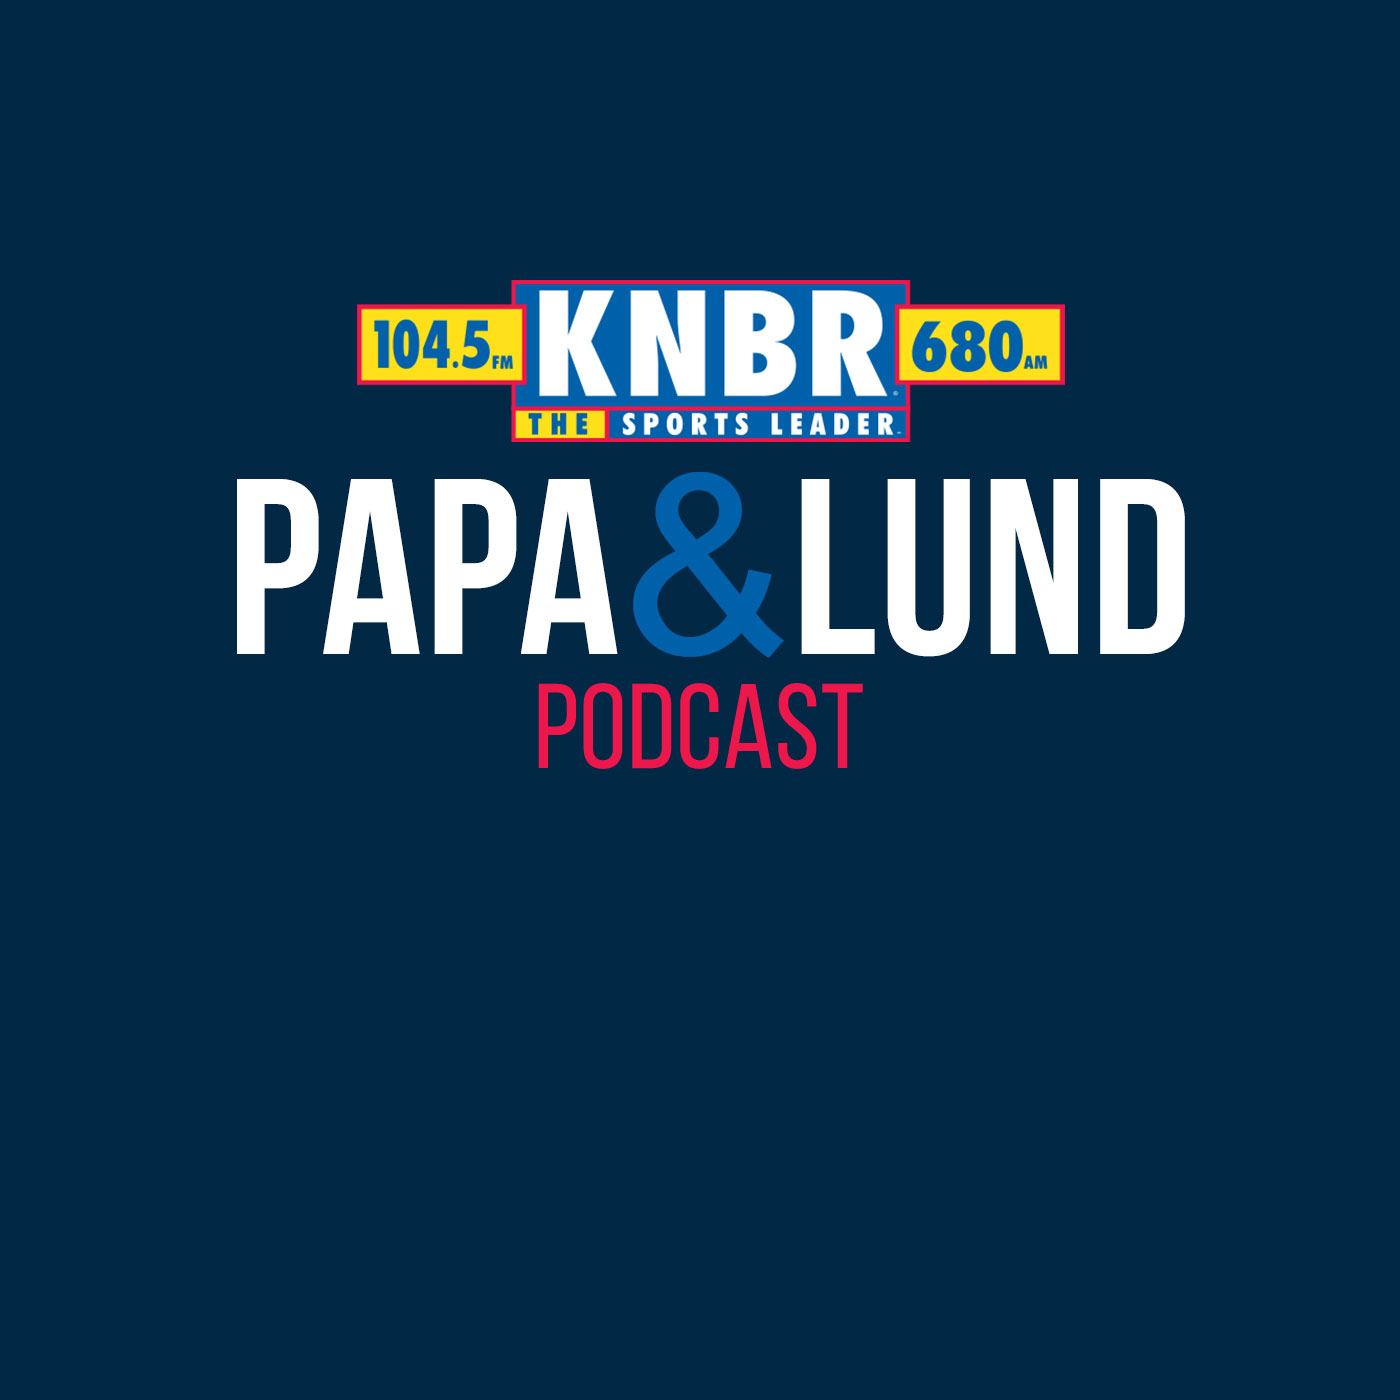 6-25 Vida Blue joins P&L to discuss The Bay Bridge Series, who he is pulling for, and fans returning to the stands at full capacity